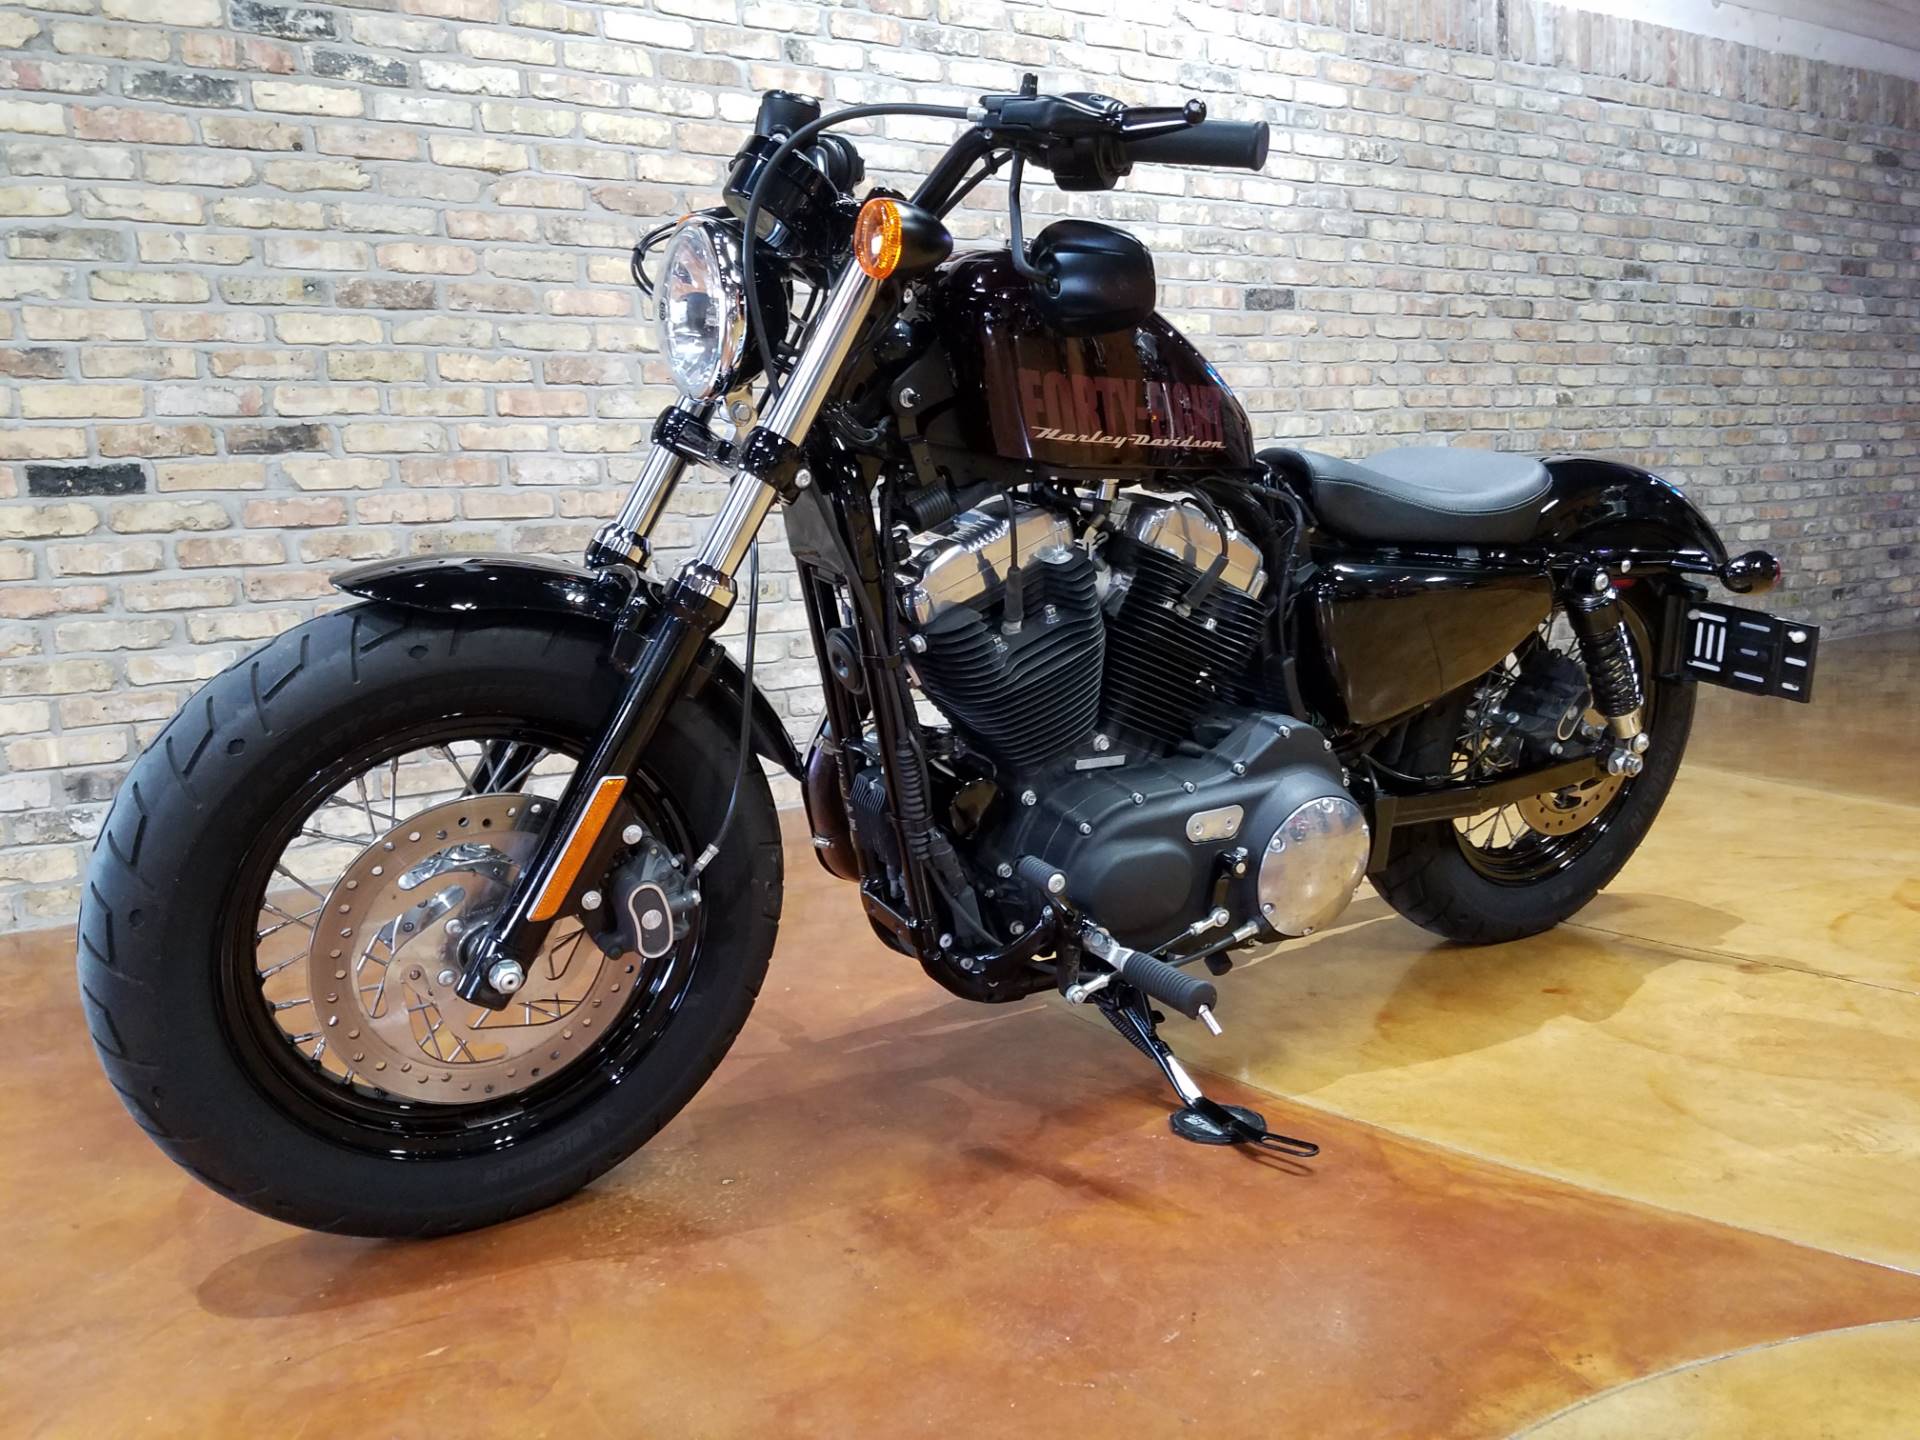 Used 2014 Harley Davidson Sportster Forty Eight Motorcycles In Big Bend Wi 4254j Blackened Cayenne Sunglo